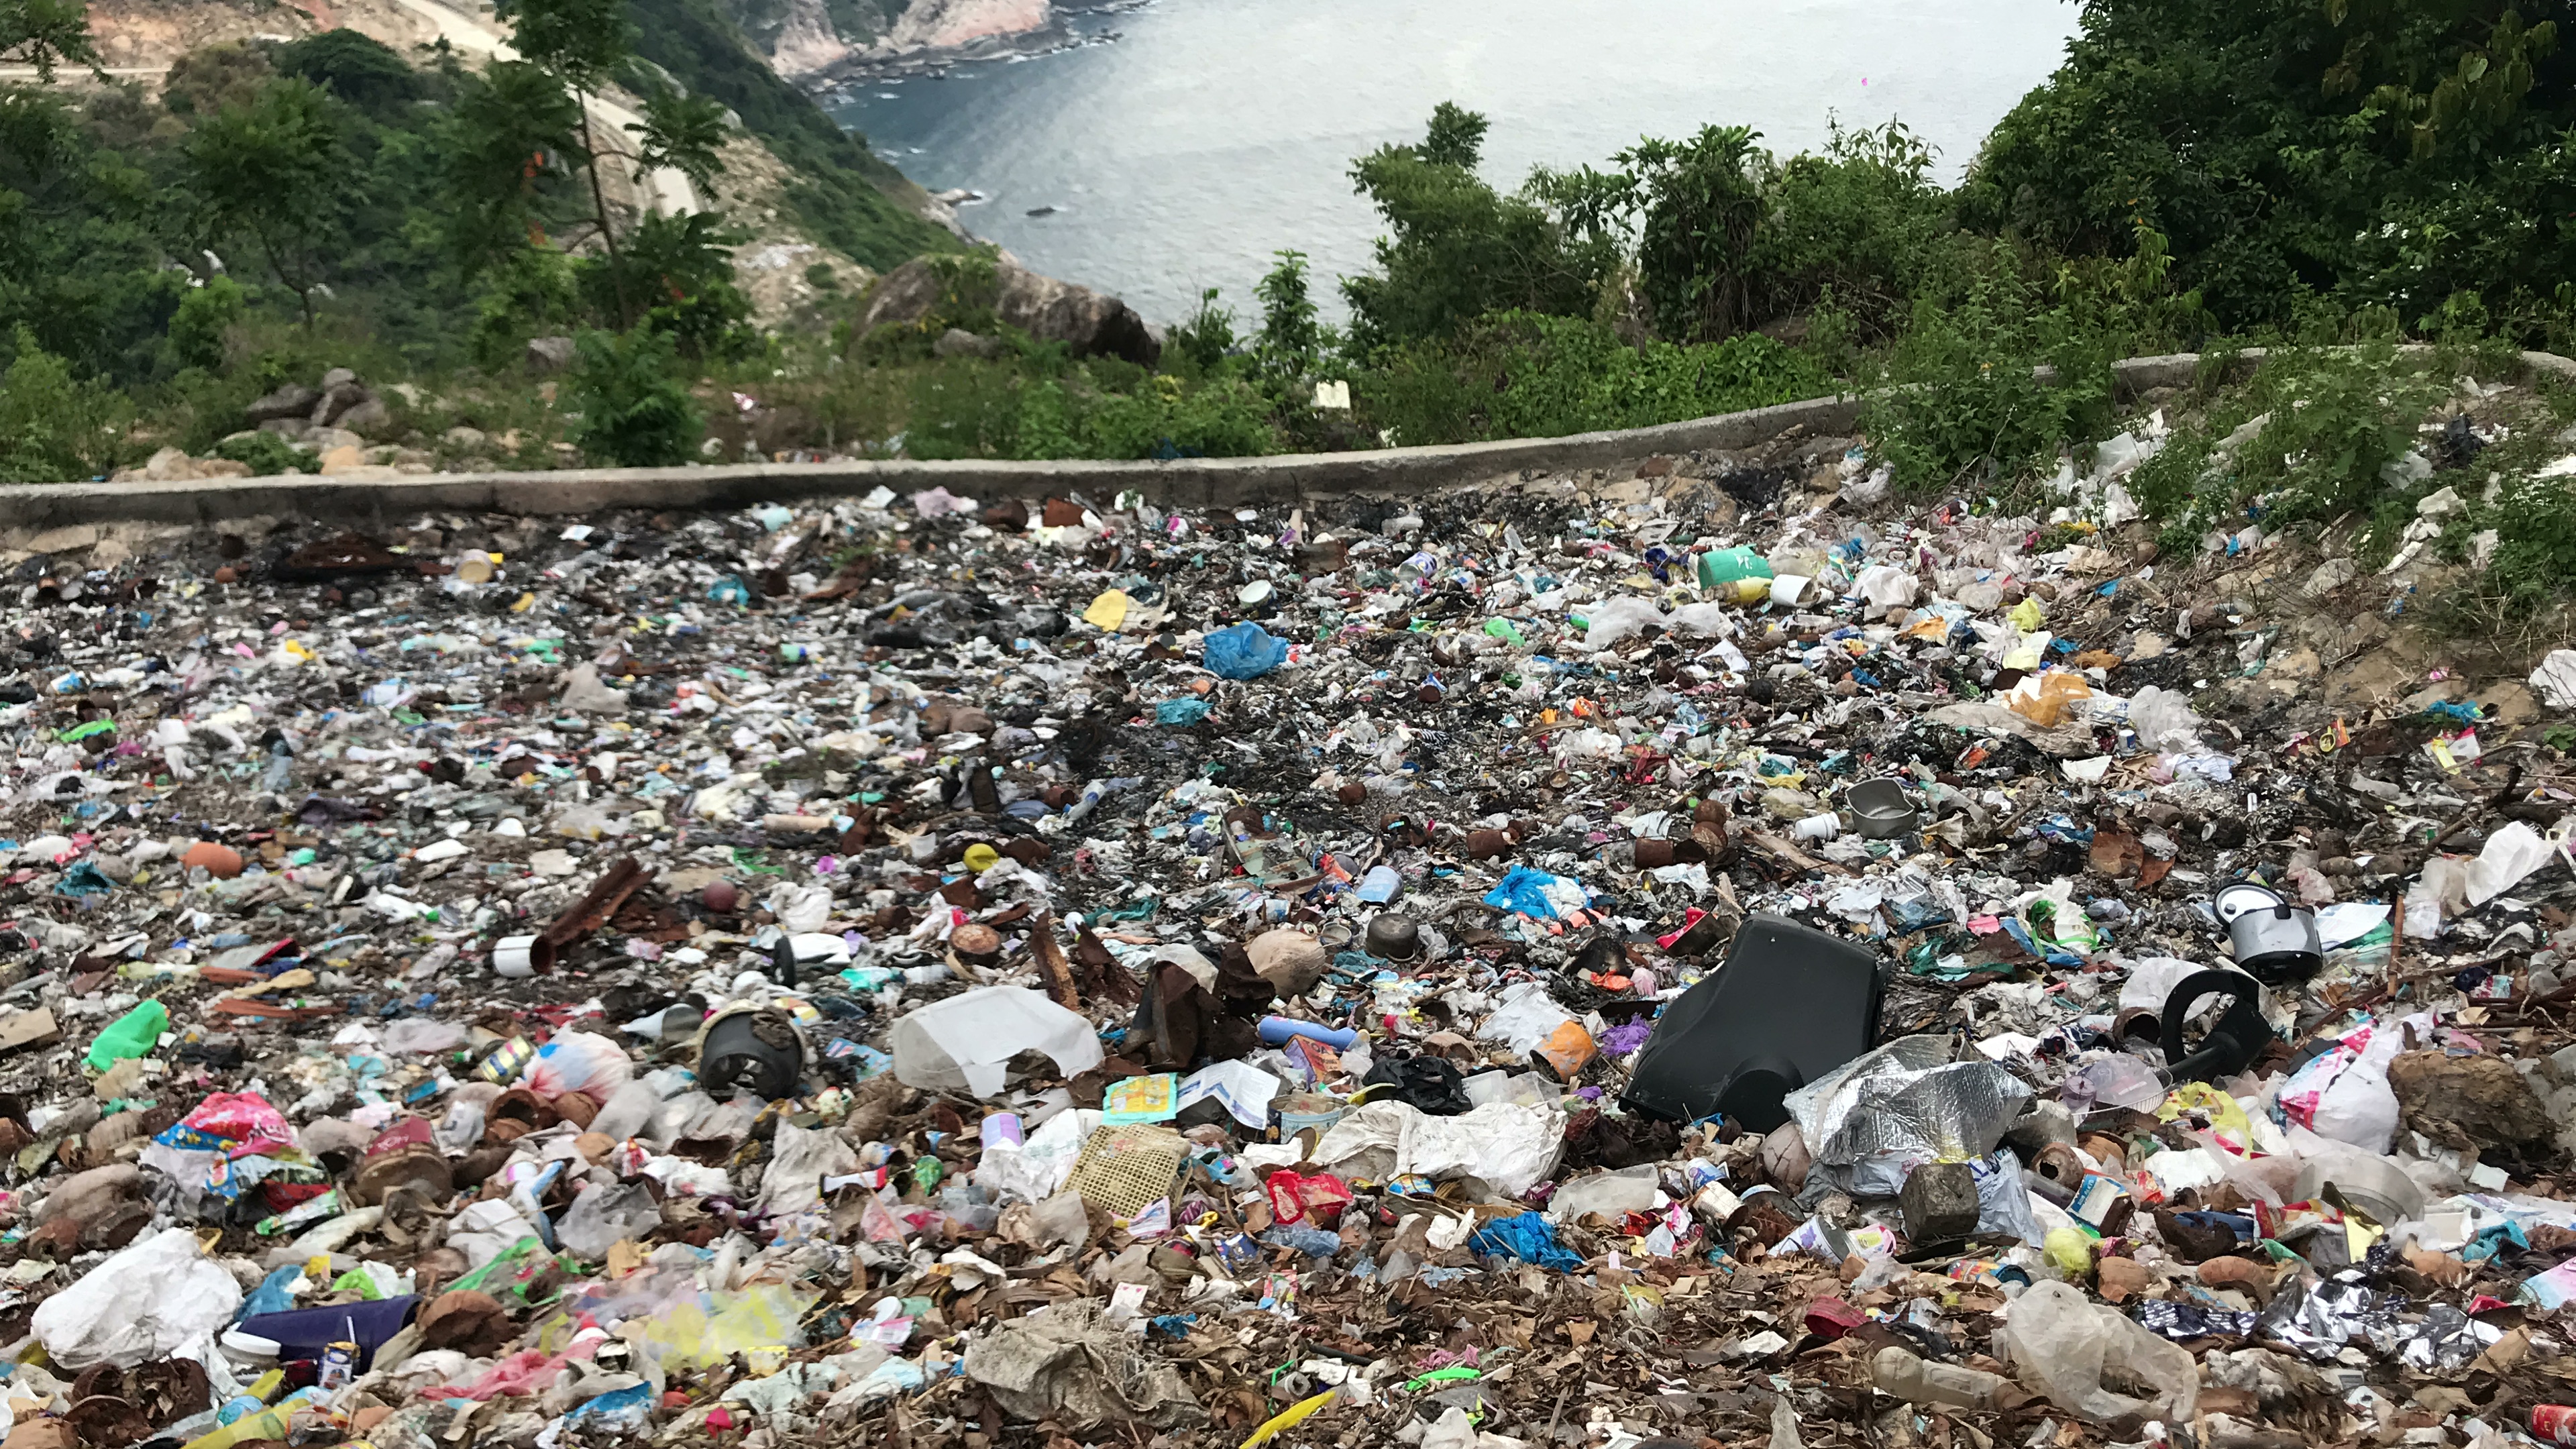 Waste in the landfill of Cham island